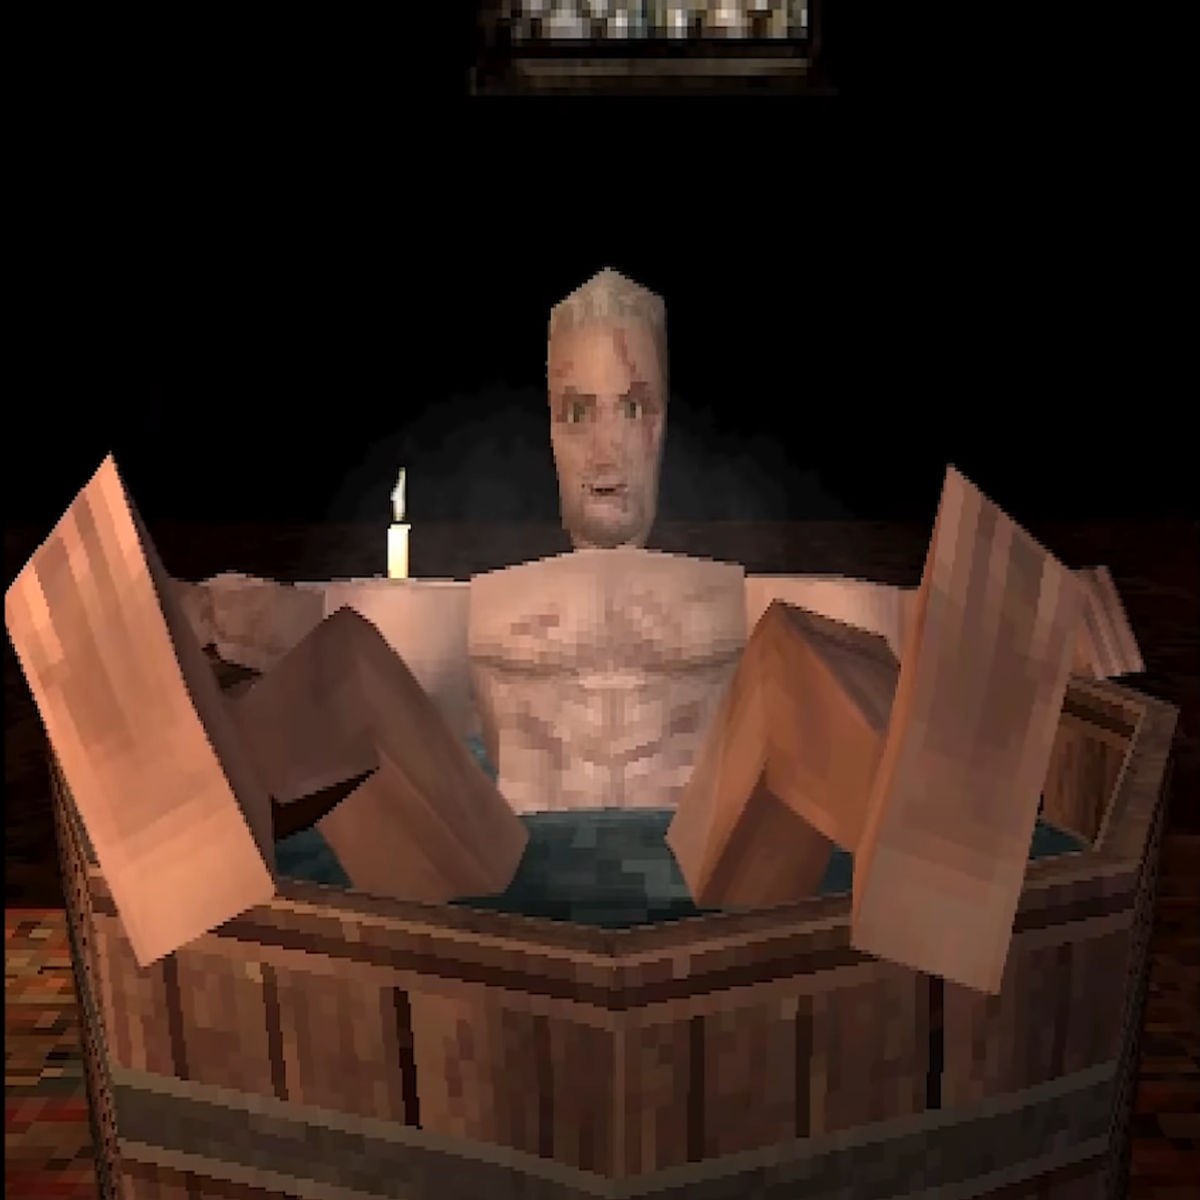 The Witcher 3 Bathtub Scene Has Been Reimagined As PS1 Game